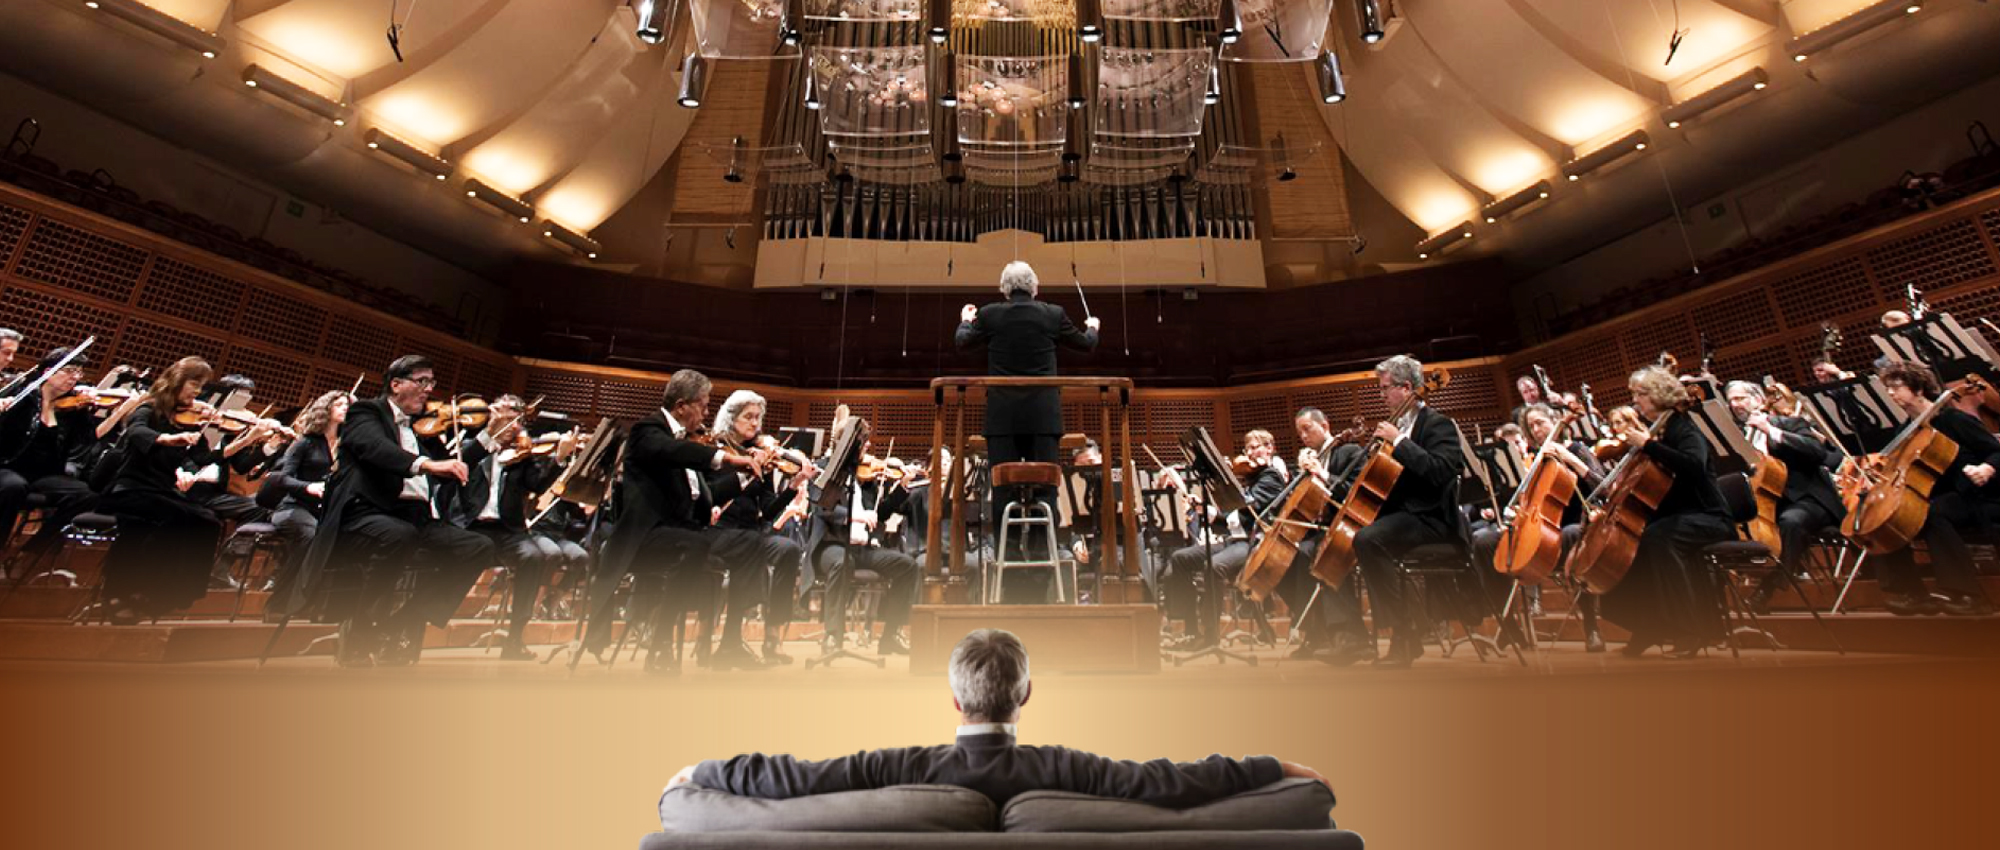 immersive symphonic venue home listening high fidelity experience